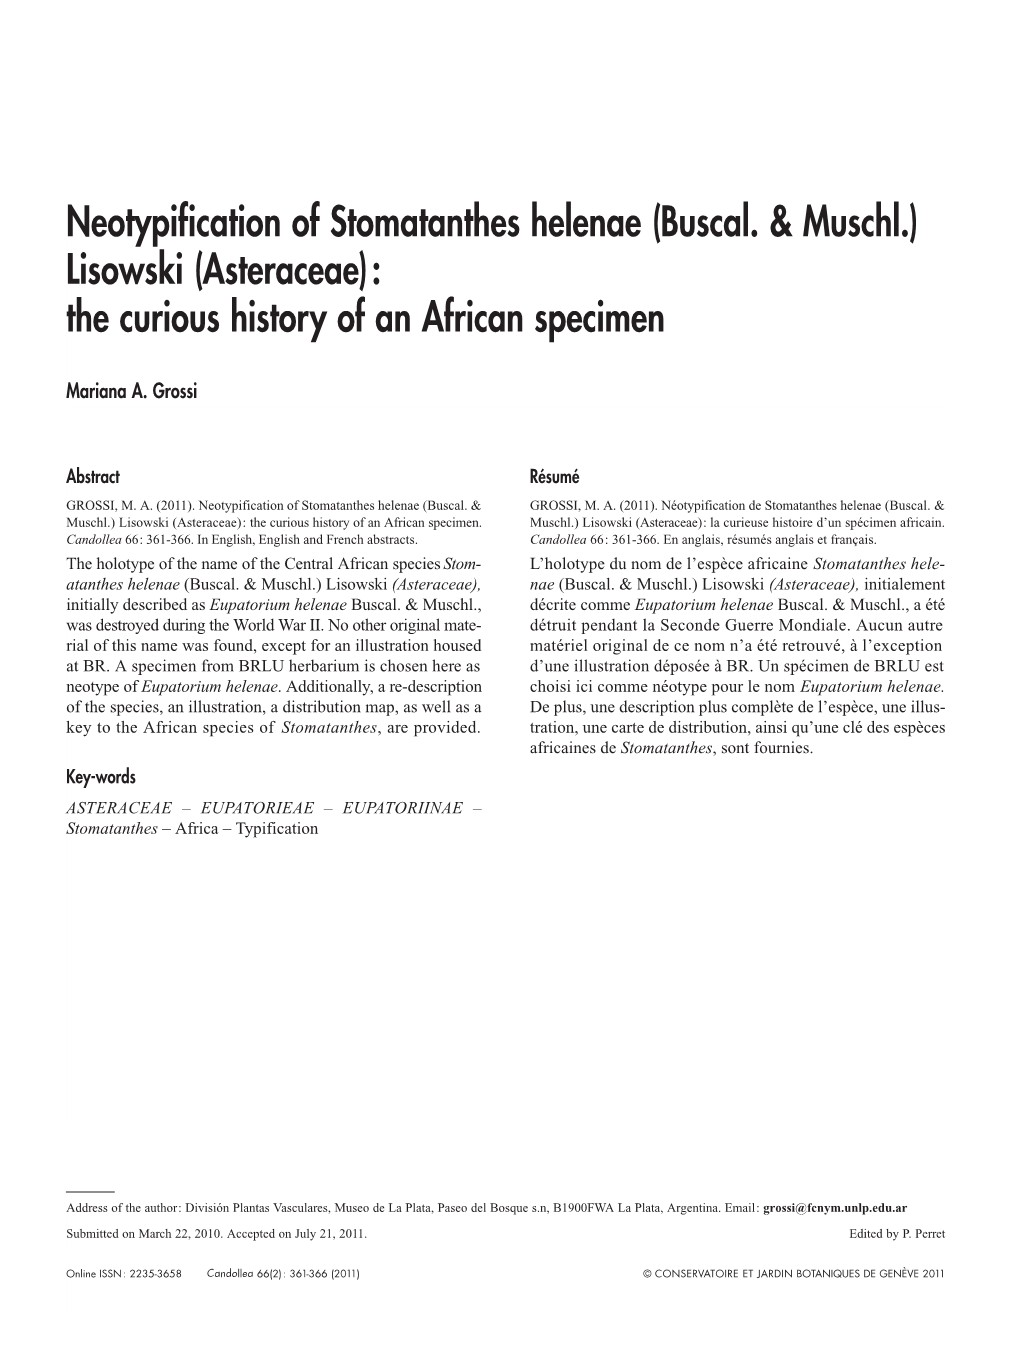 Neotypification of Stomatanthes Helenae (Buscal. & Muschl.) Lisowski